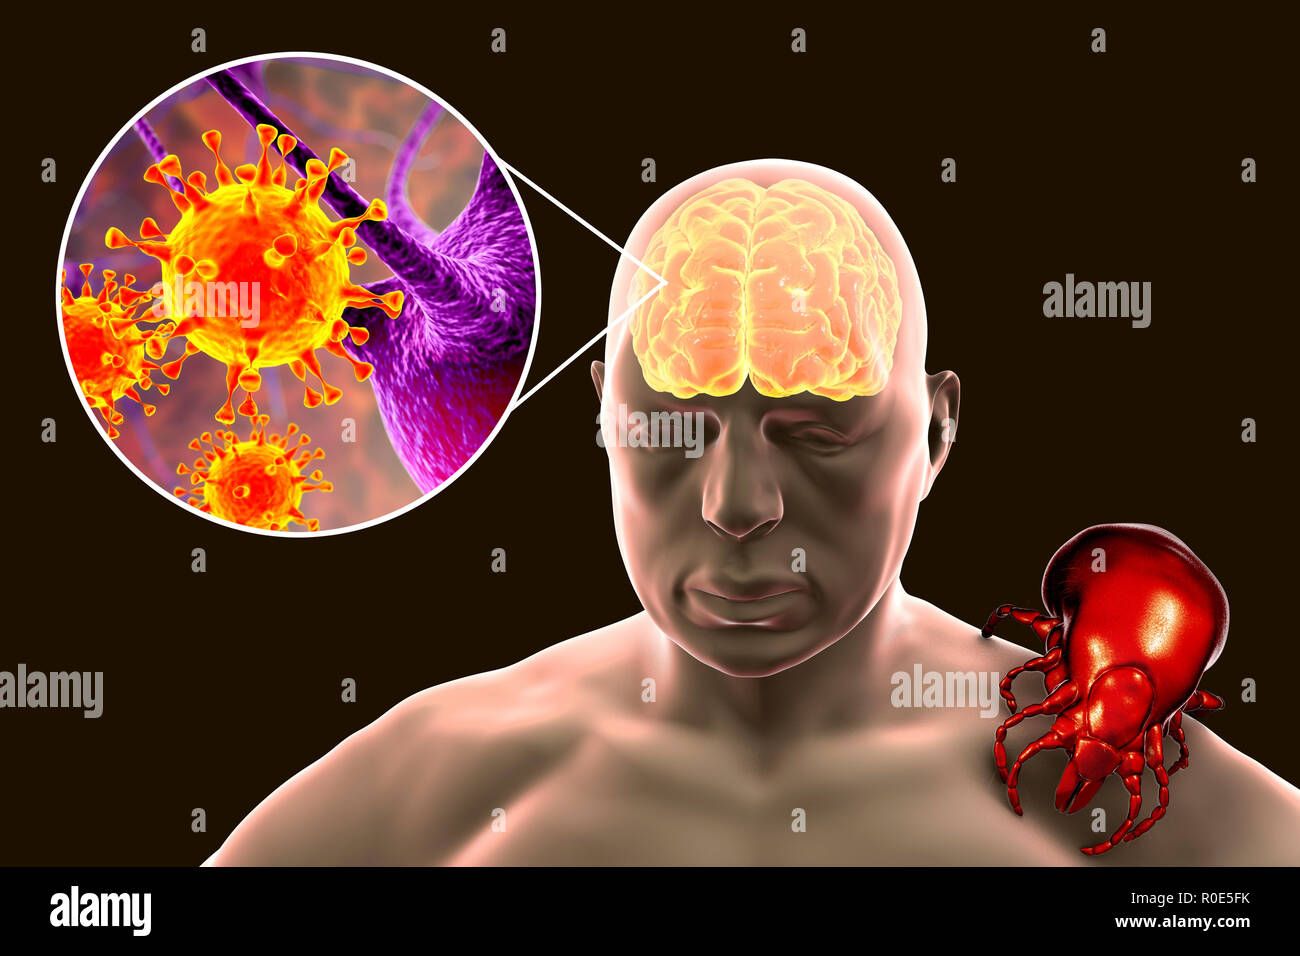 Tick-bourne encephalitis, computer illustration. Tick- borne encephalitis (inflammation of the brain) covers a range of illnesses ranging from a severe paralytic encephalitis, which occurs in Siberia and is transmitted by Ixodes persulcatus, to a less paralytic encephalitis, which is found in central Europe and transmitted by Ixodes ricinus. Agricultural and forestry workers are most frequently affected, as the foci of infection are in and around forest areas, the vertebrate maintenance hosts being rodents and ground-living birds. Stock Photo